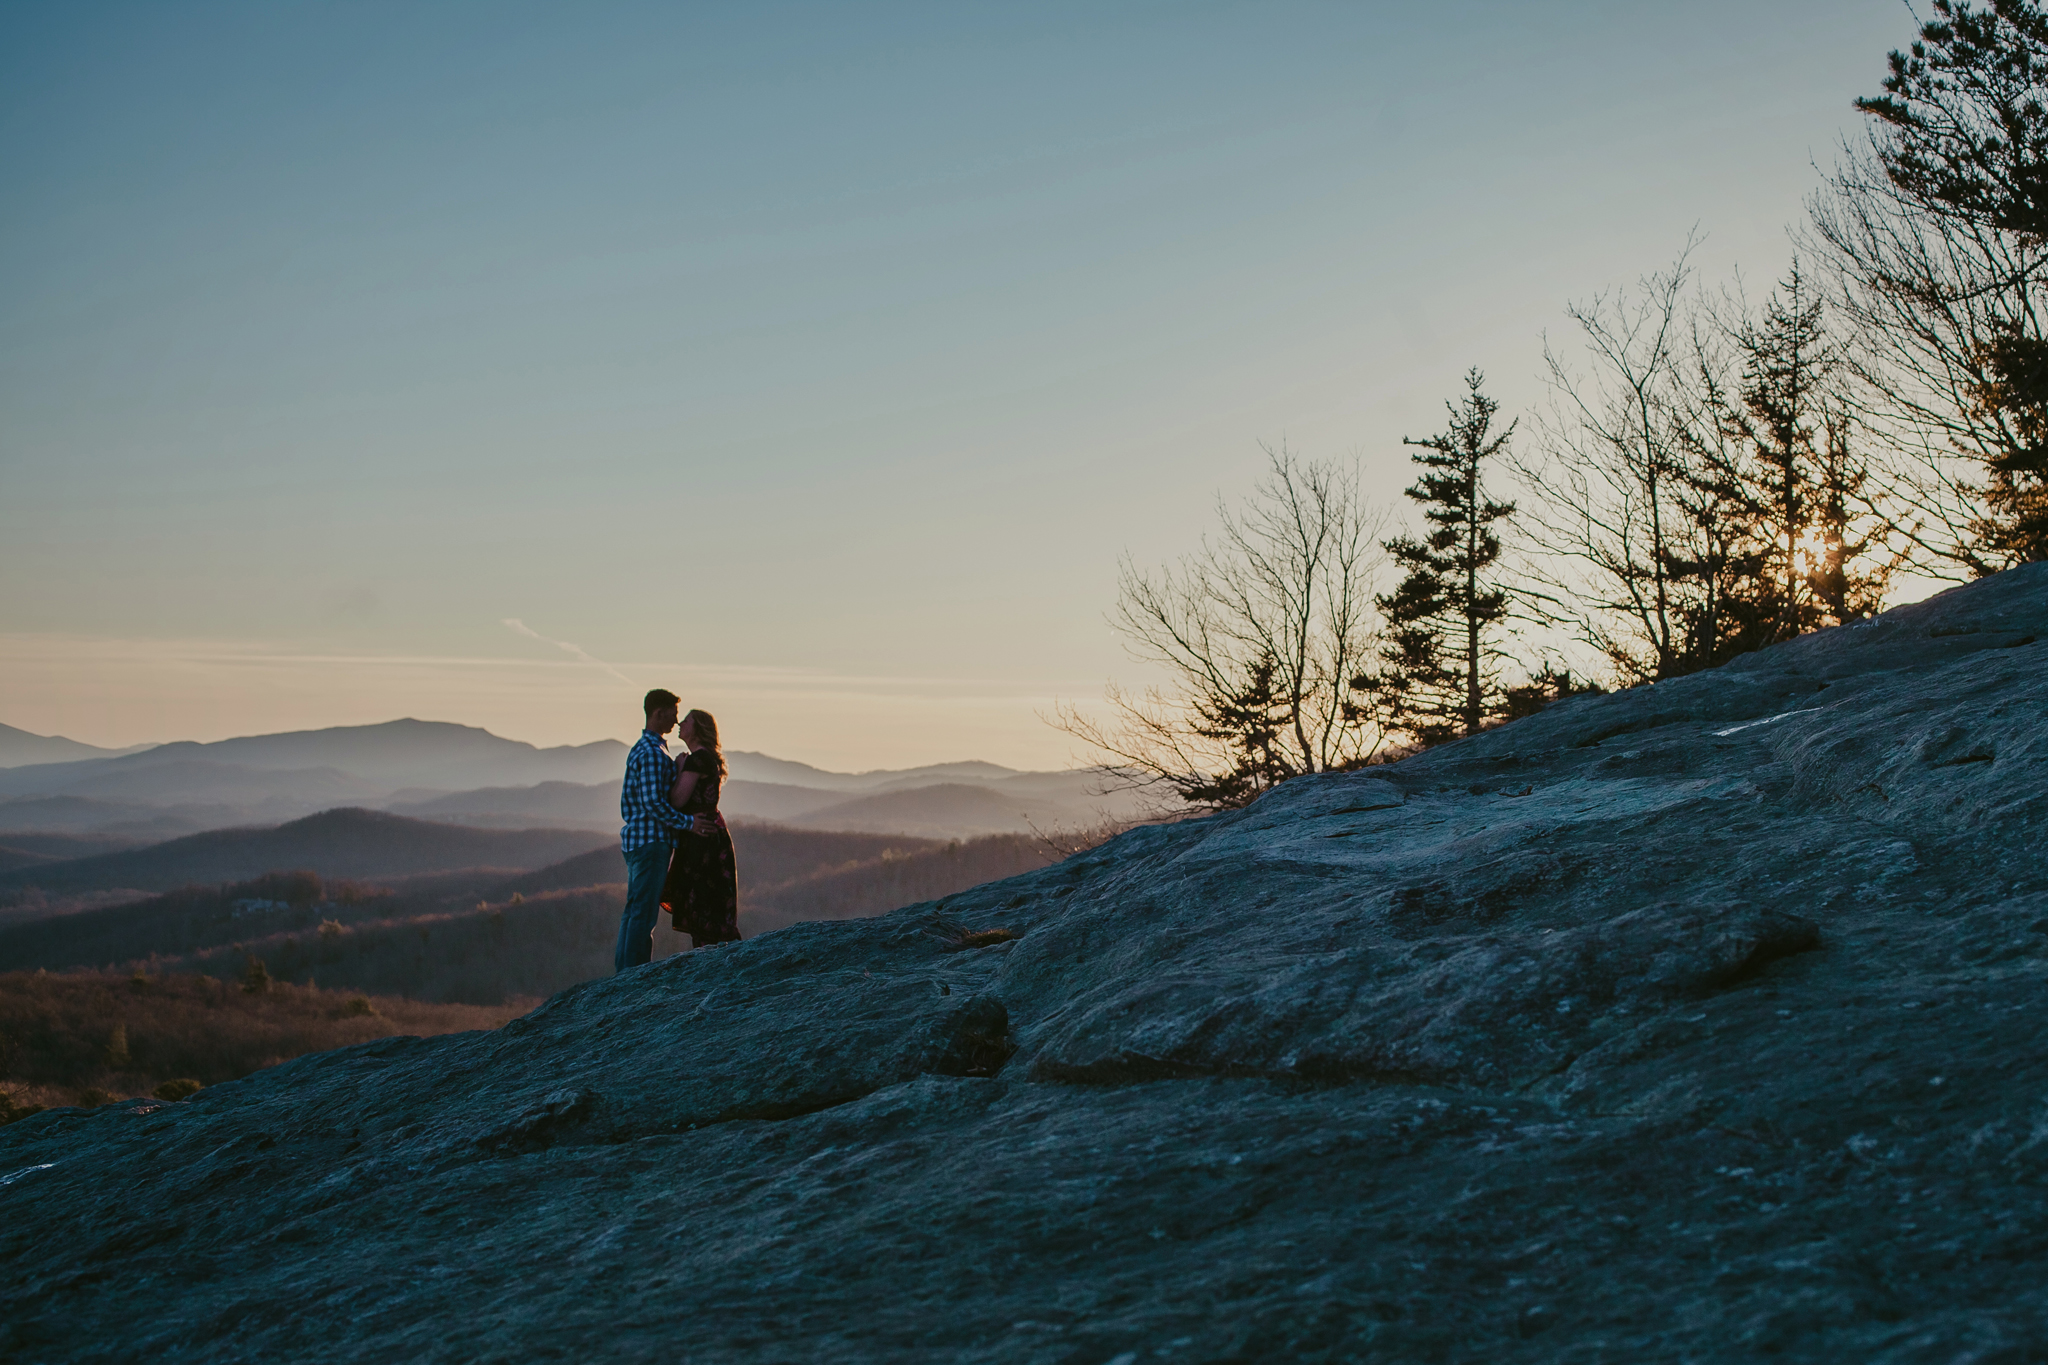 A sunset mountain view during Mallory & Peter's engagment session at Beacon Heights. Photo by Mabyn Ludke.